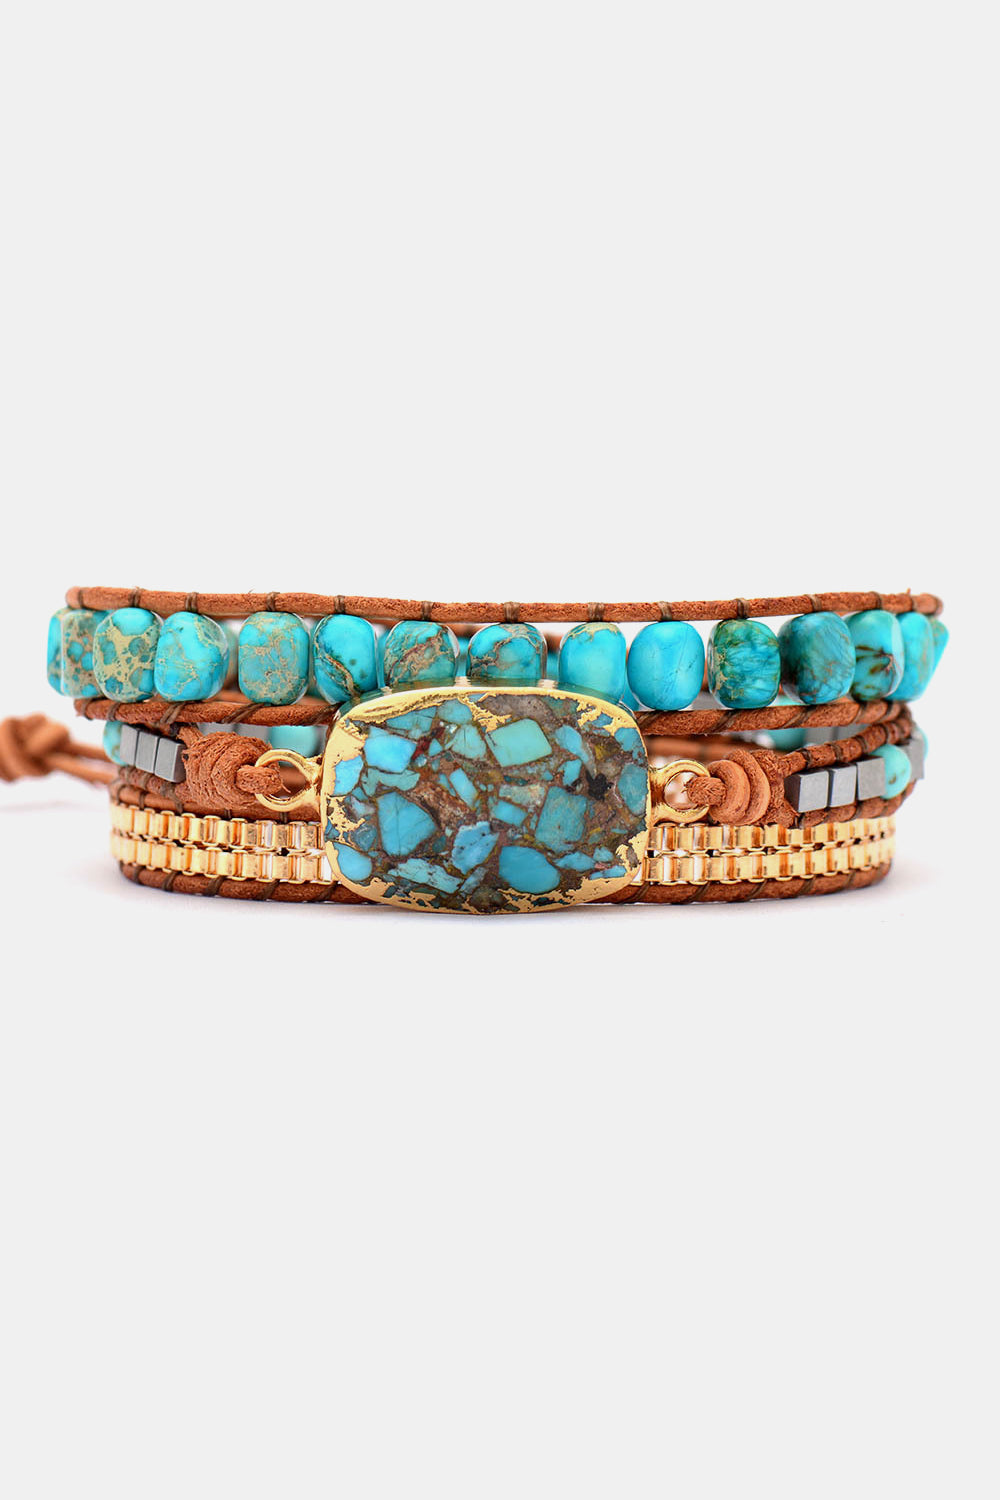 Handmade Natural Stone Copper Bracelet  Available in Multiple Colors